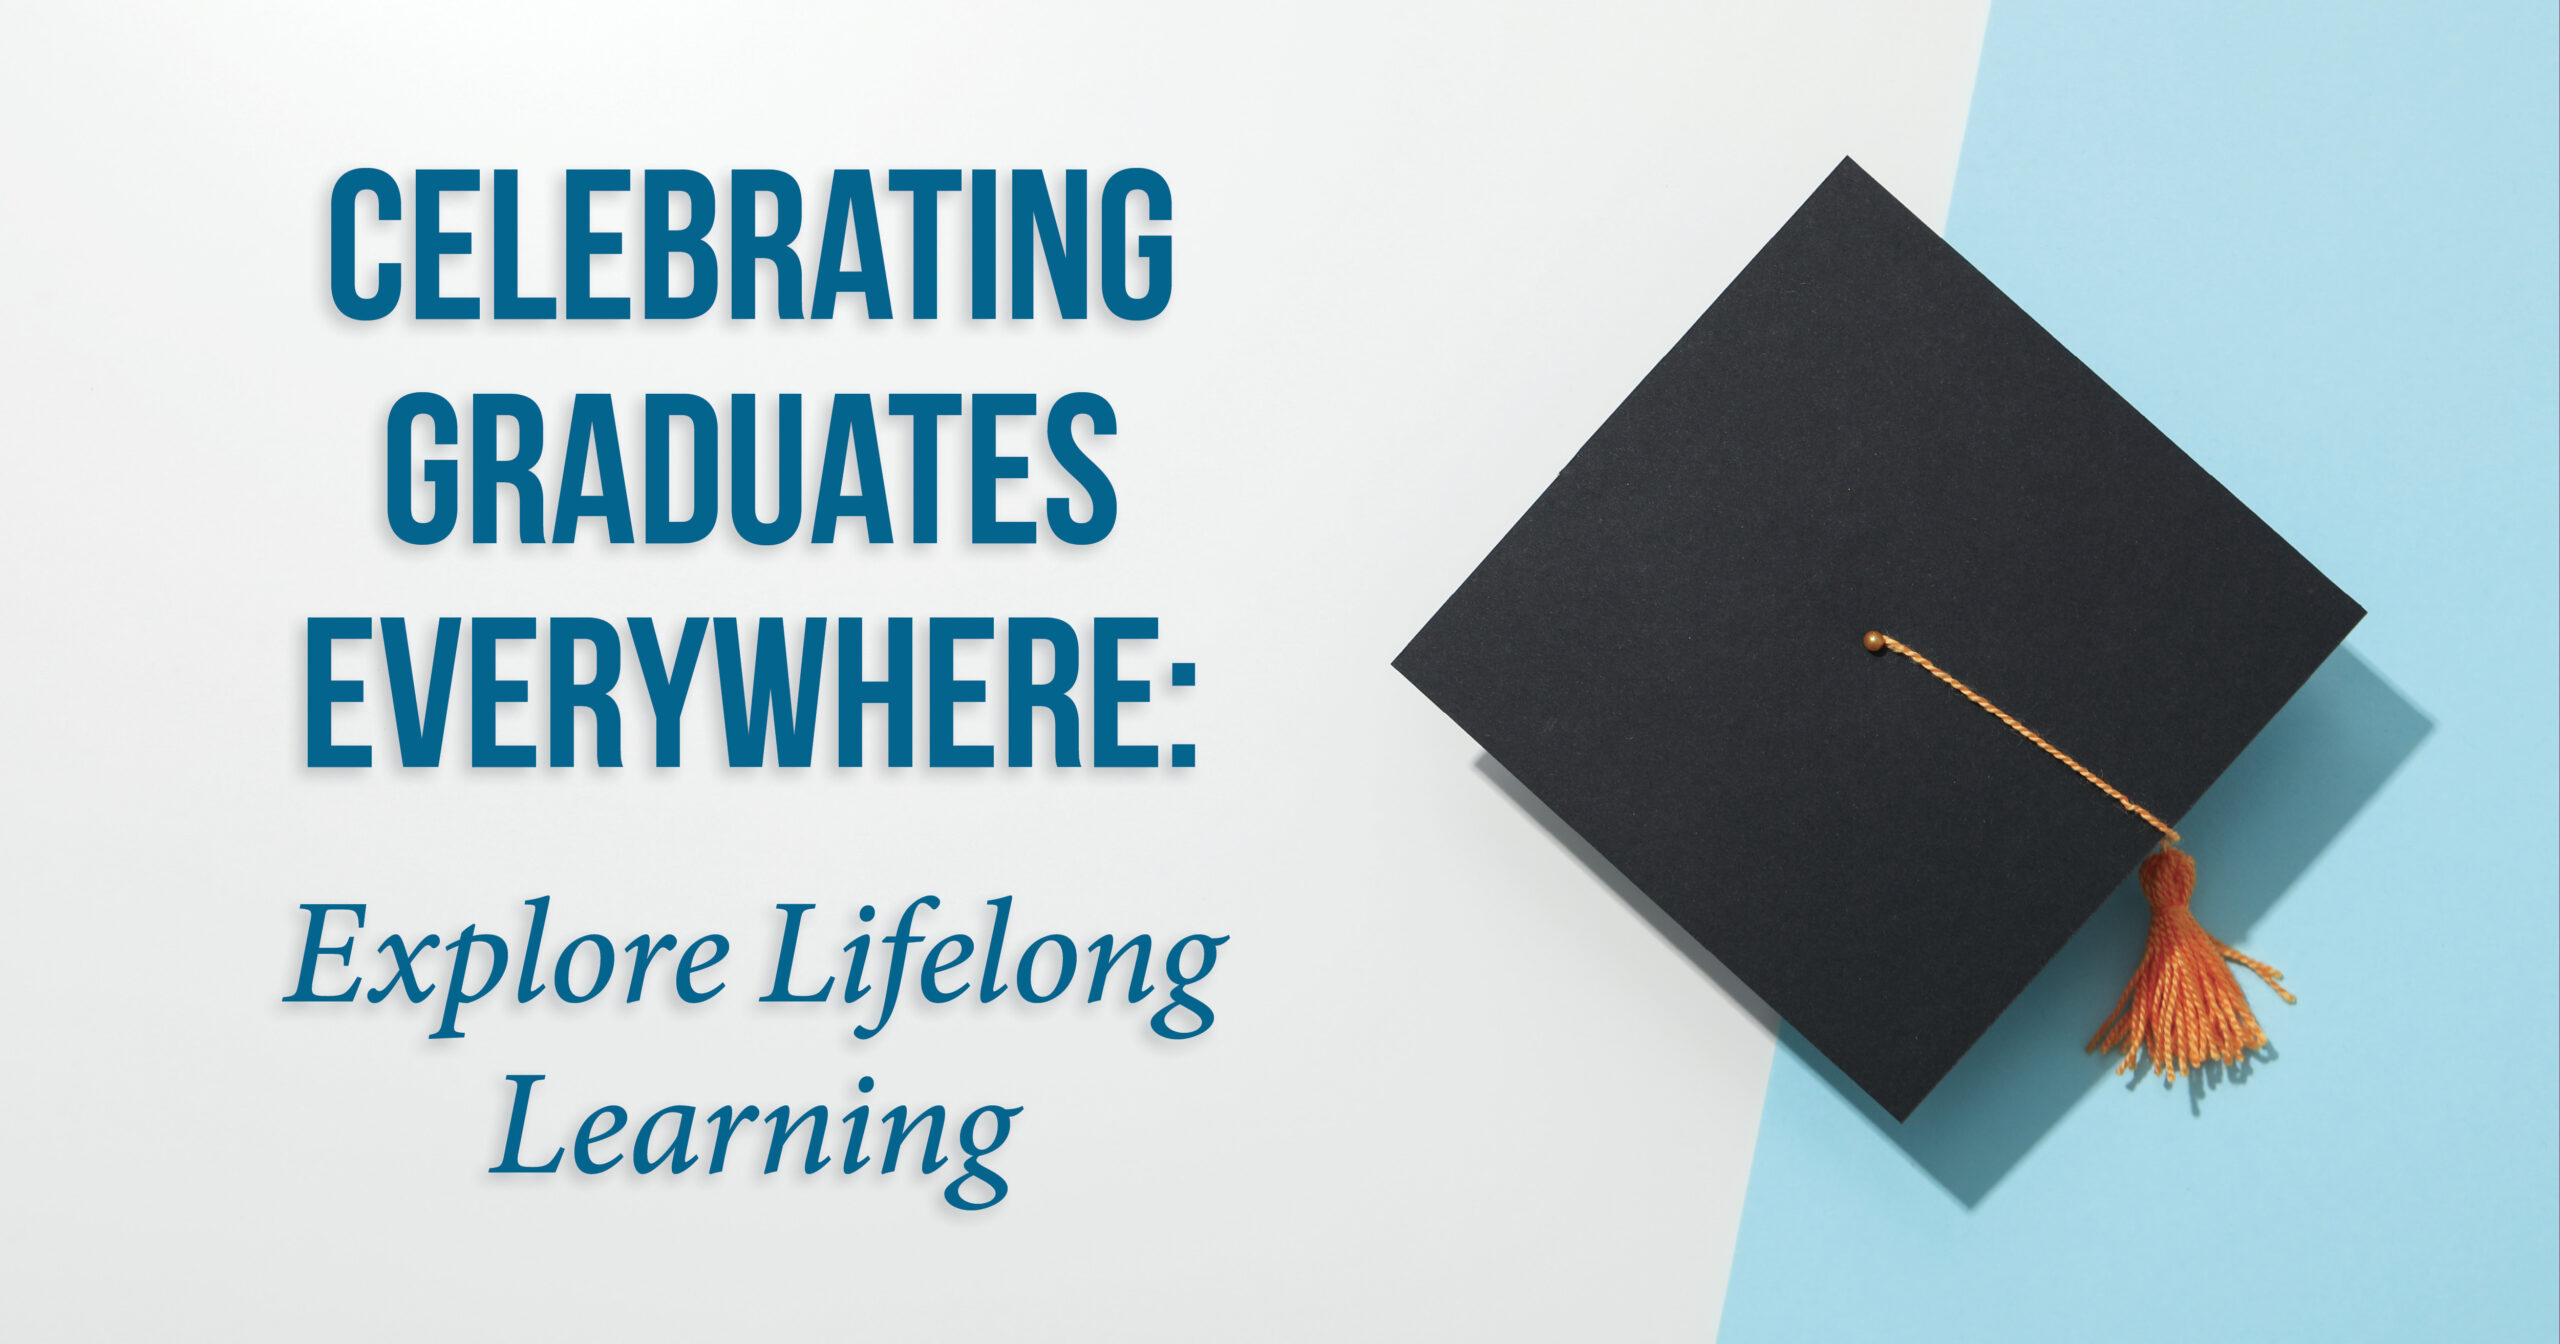 Celebrating Graduates Everywhere: Explore Lifelong Learning at Our Communities